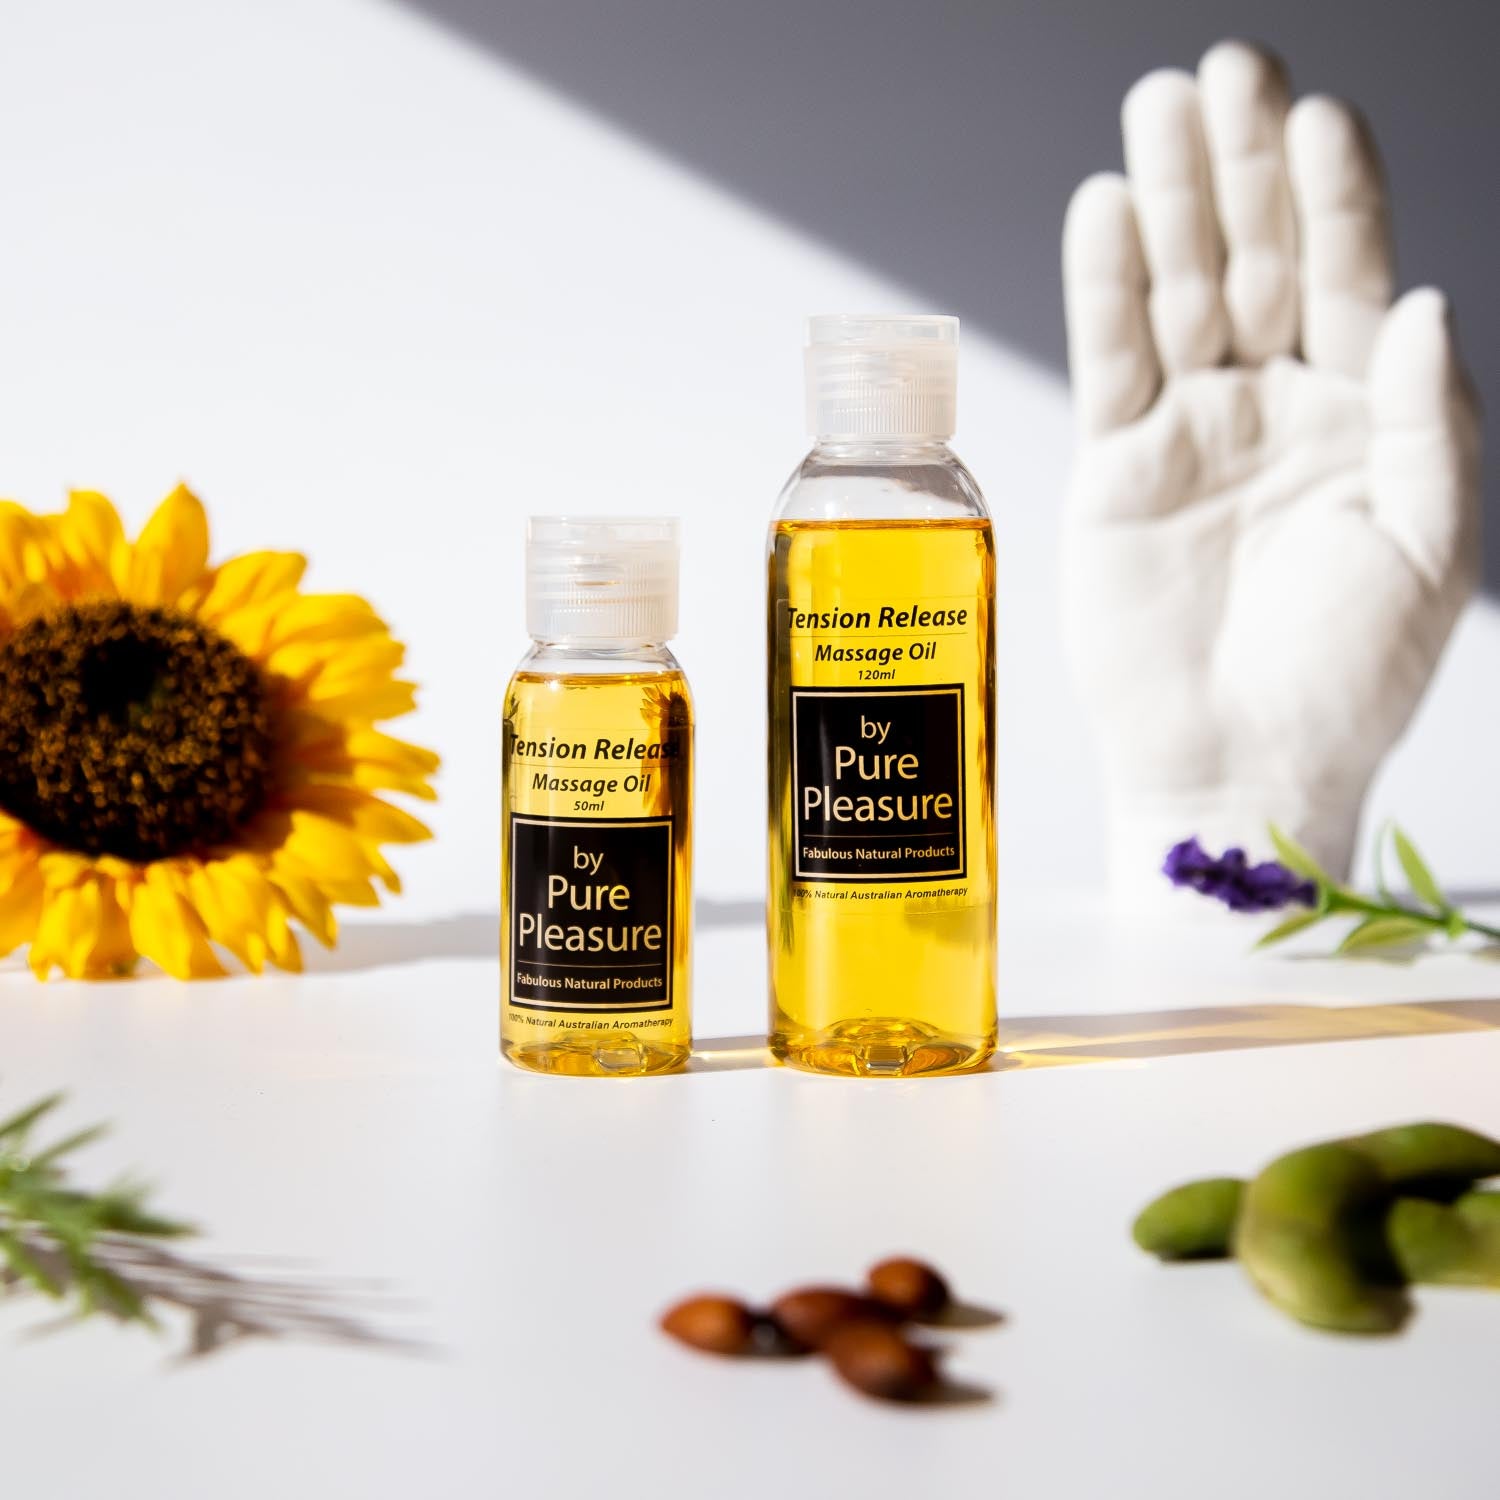 Tension Release - Natural Massage Oil